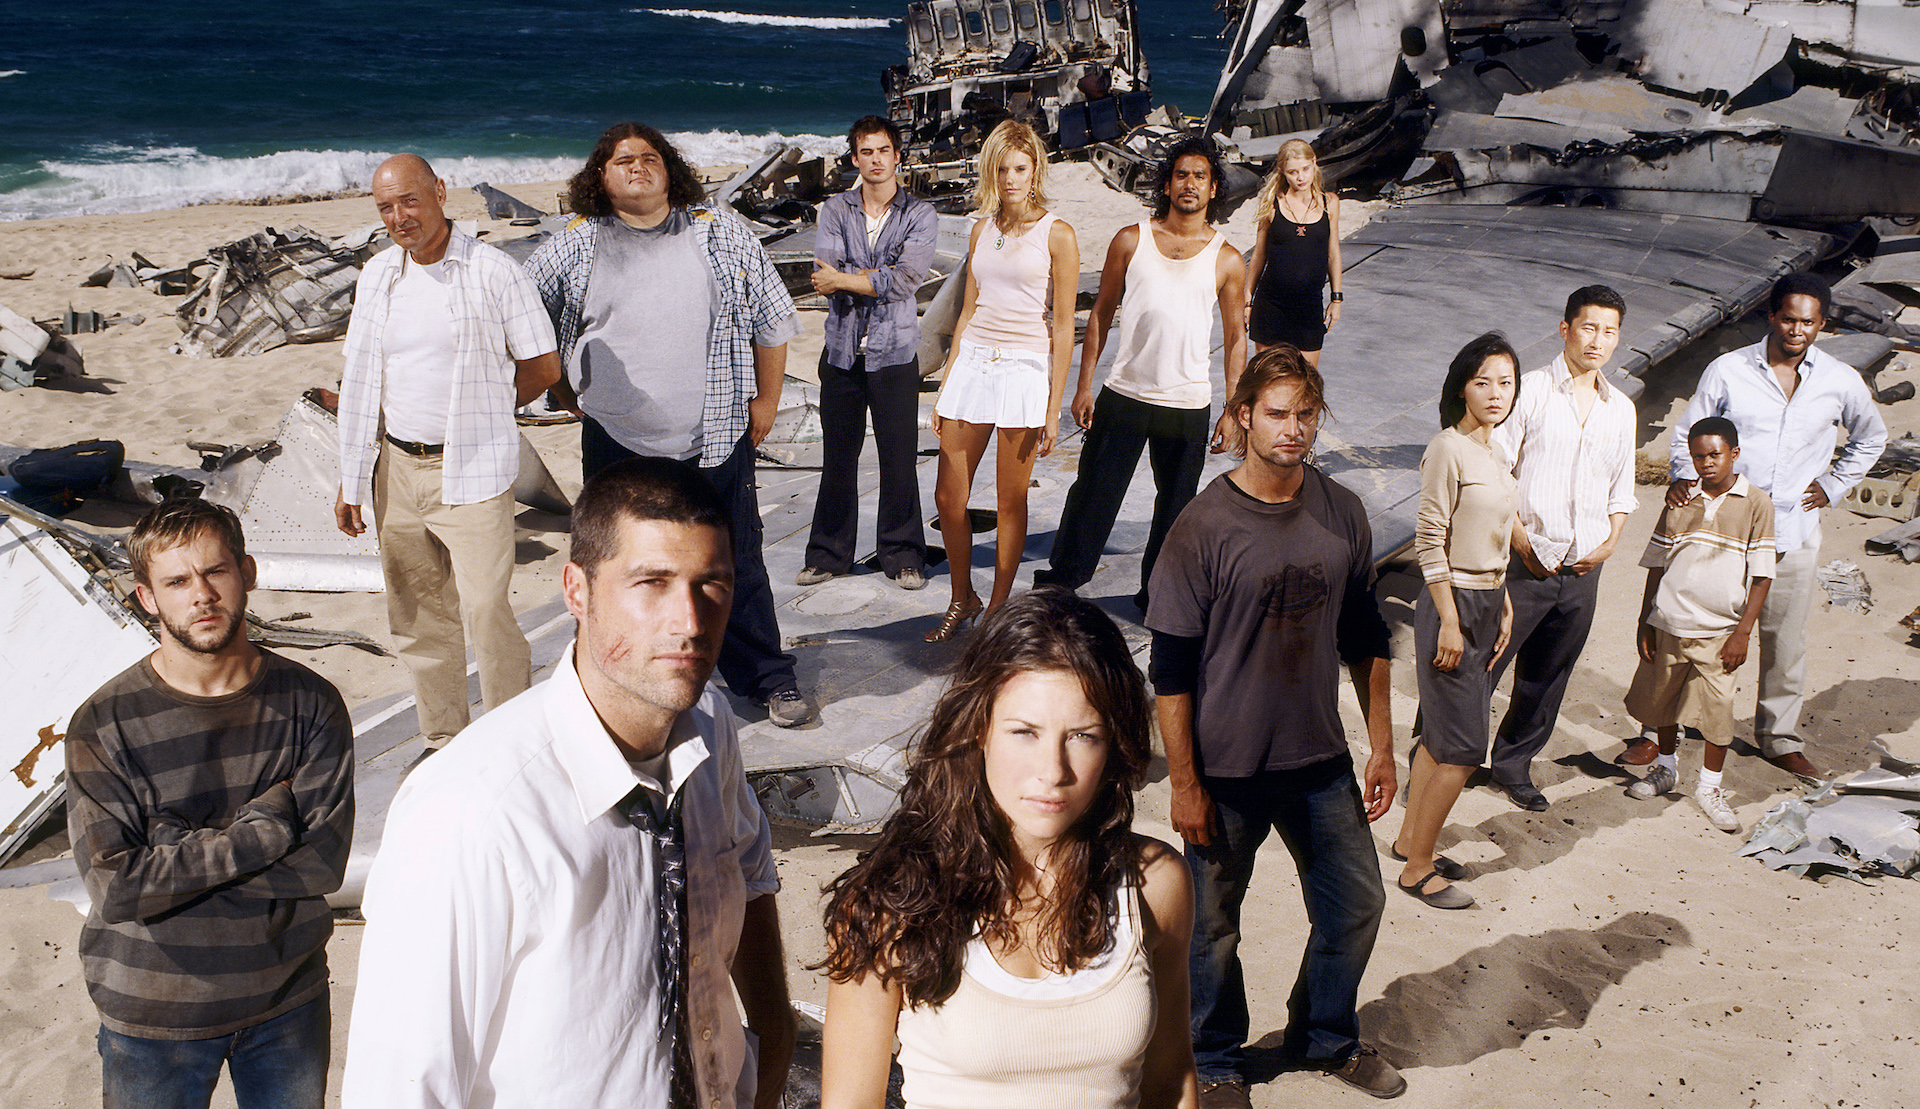 A group of people standing amid plane crash wreckage on a beach and looking directly into camera; promo image for 'Lost'